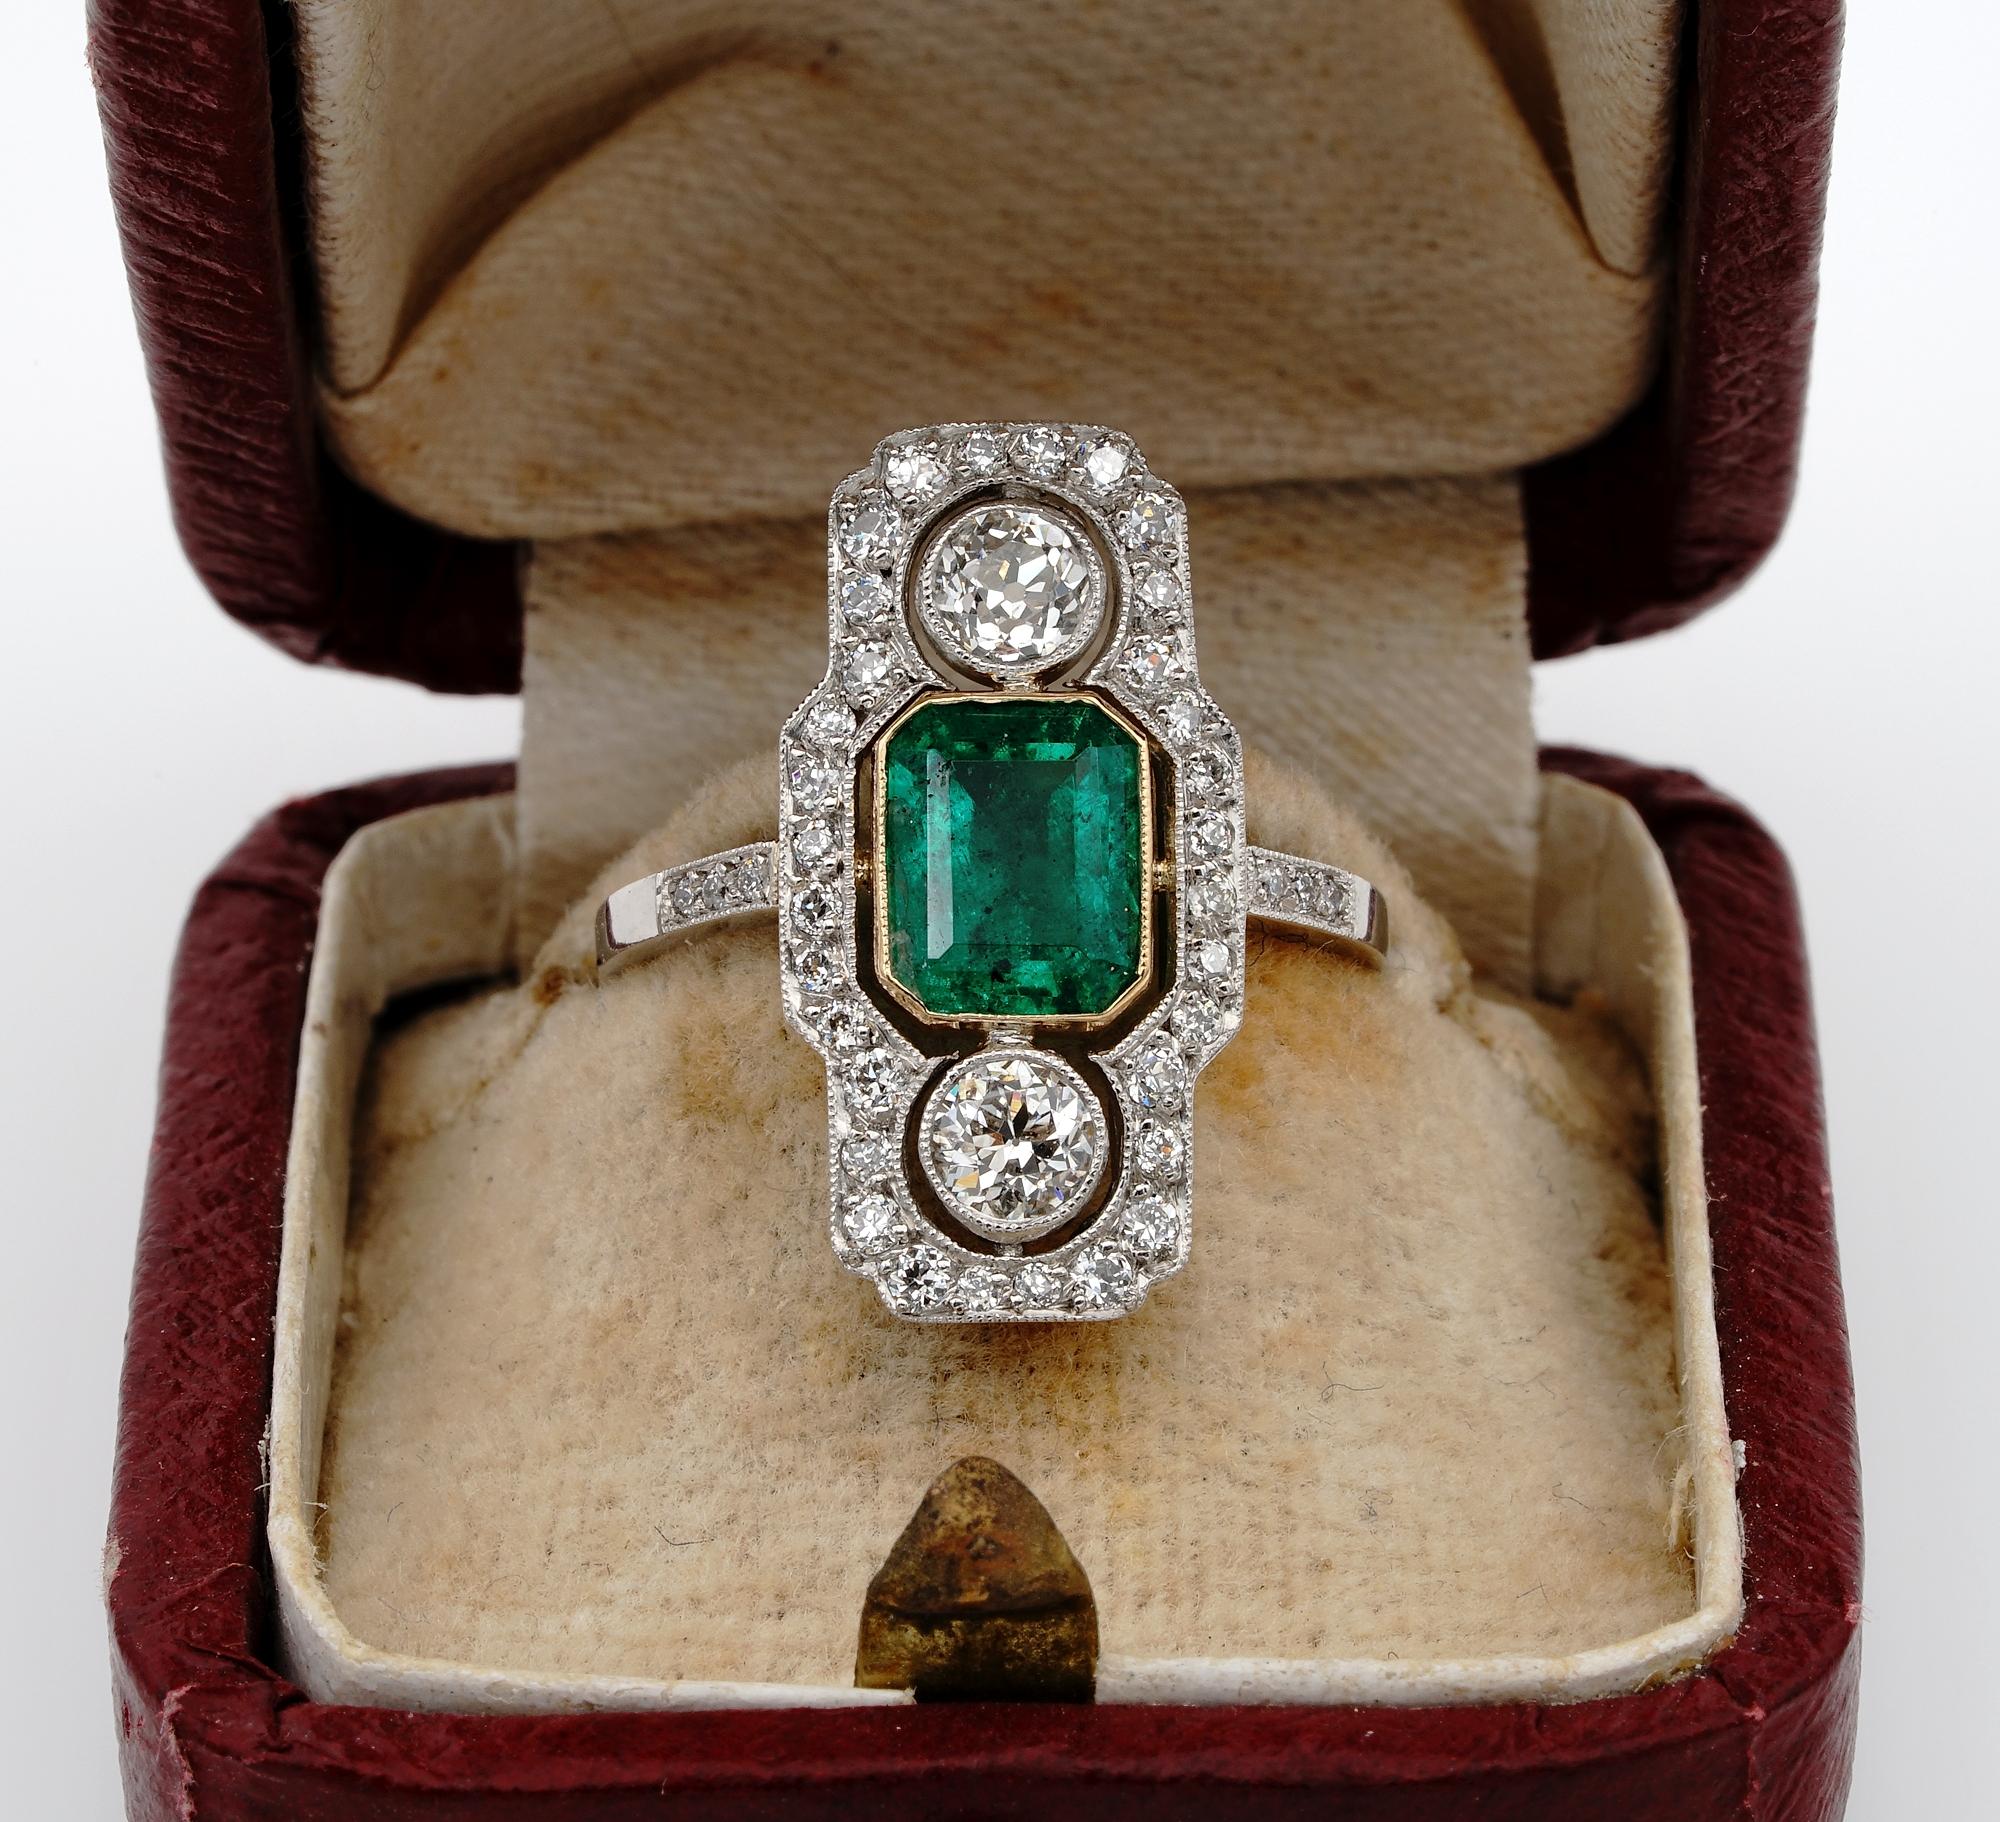 Divine rare Edwardian period Natural Colombian Emerald of gorgeous intense Green combined with sparkly Diamonds.
Live the Belle Epoque era with this authentic stunner on!
All Platinum made in the most refined craftsmanship of the era – not marked